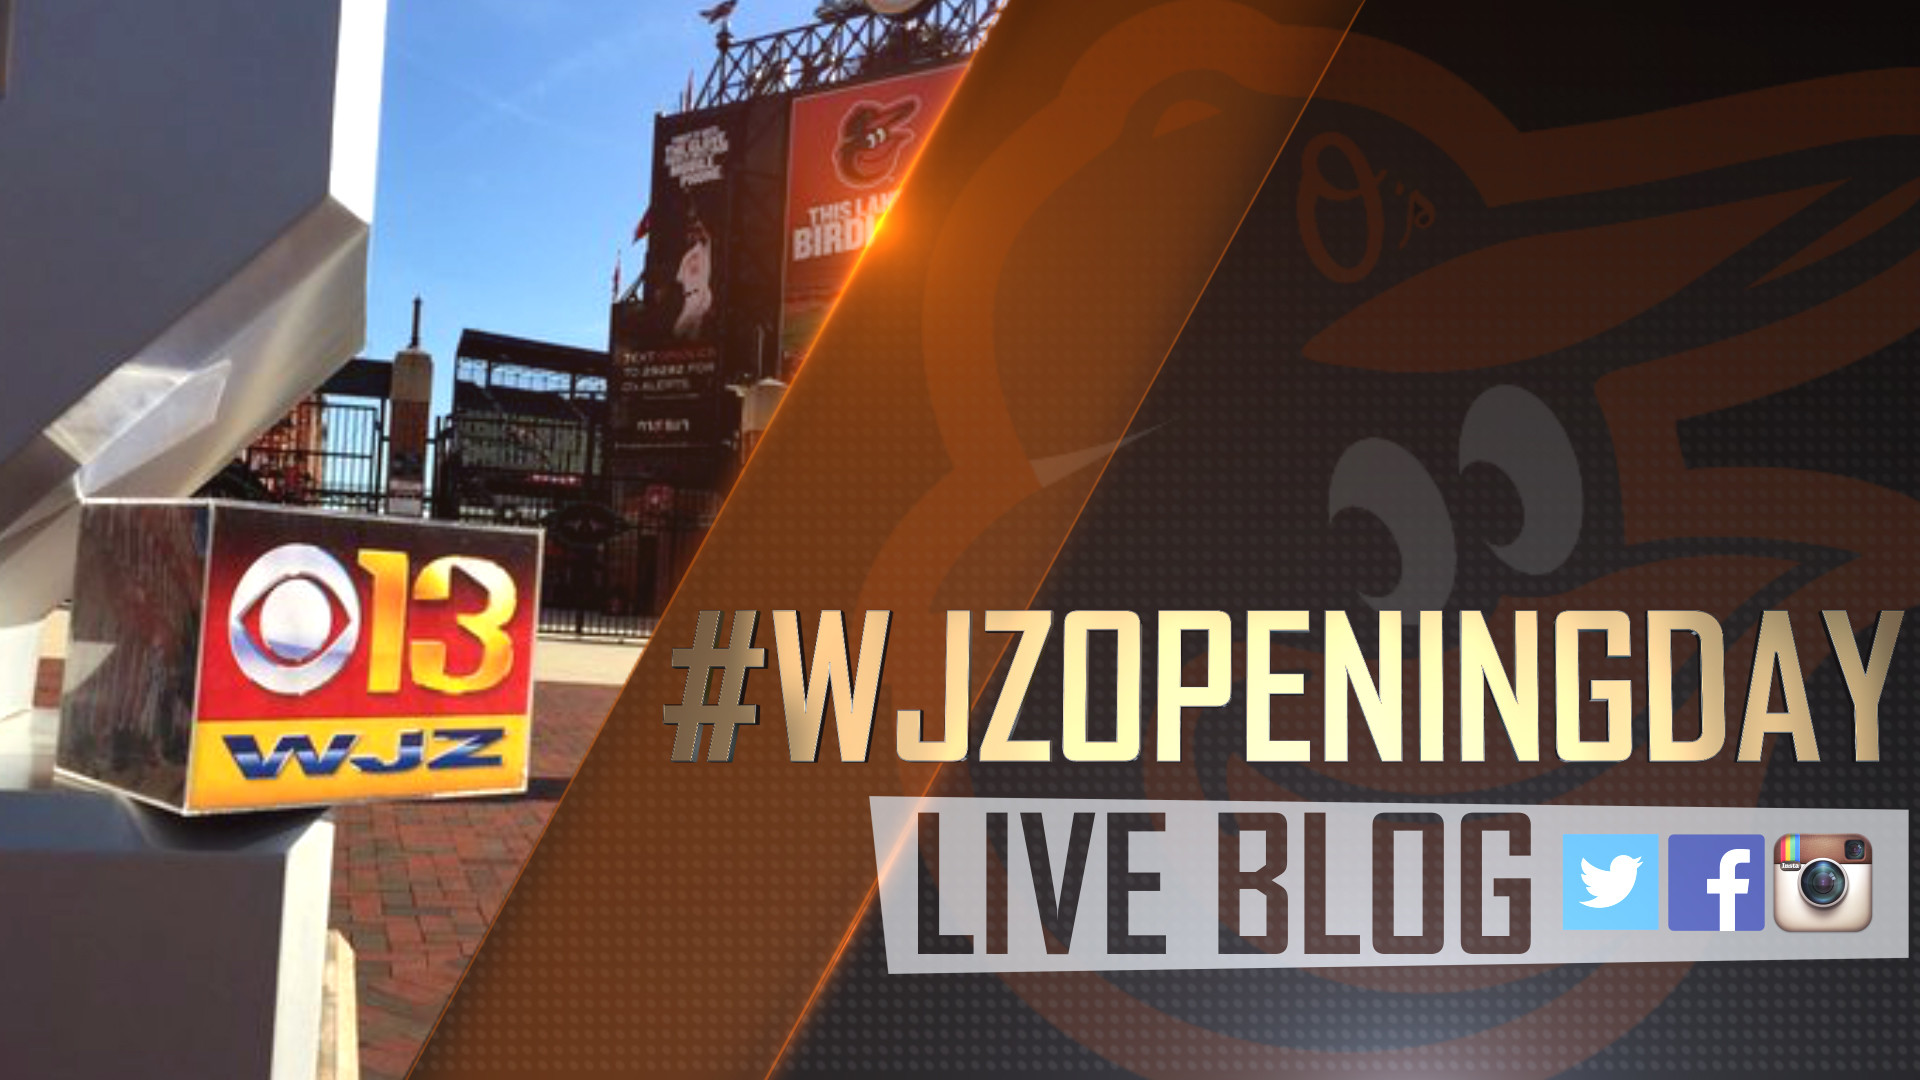 1920x1080 WJZ Opening Day Live Blog: Orioles v. Twins